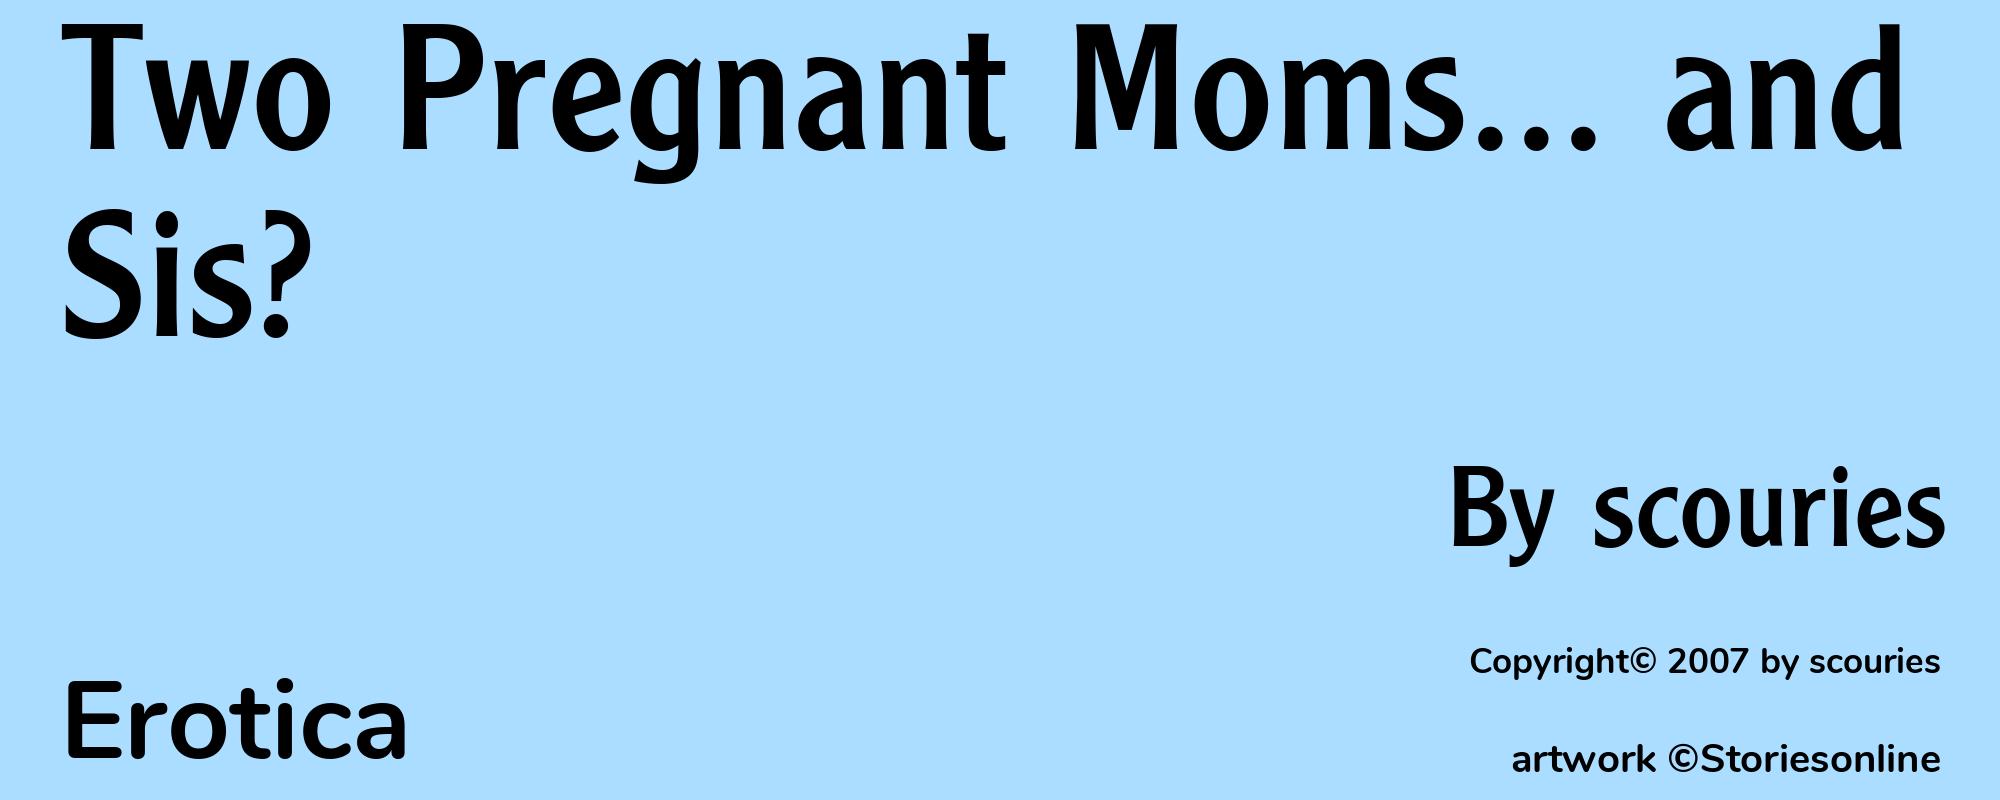 Two Pregnant Moms... and Sis? - Cover